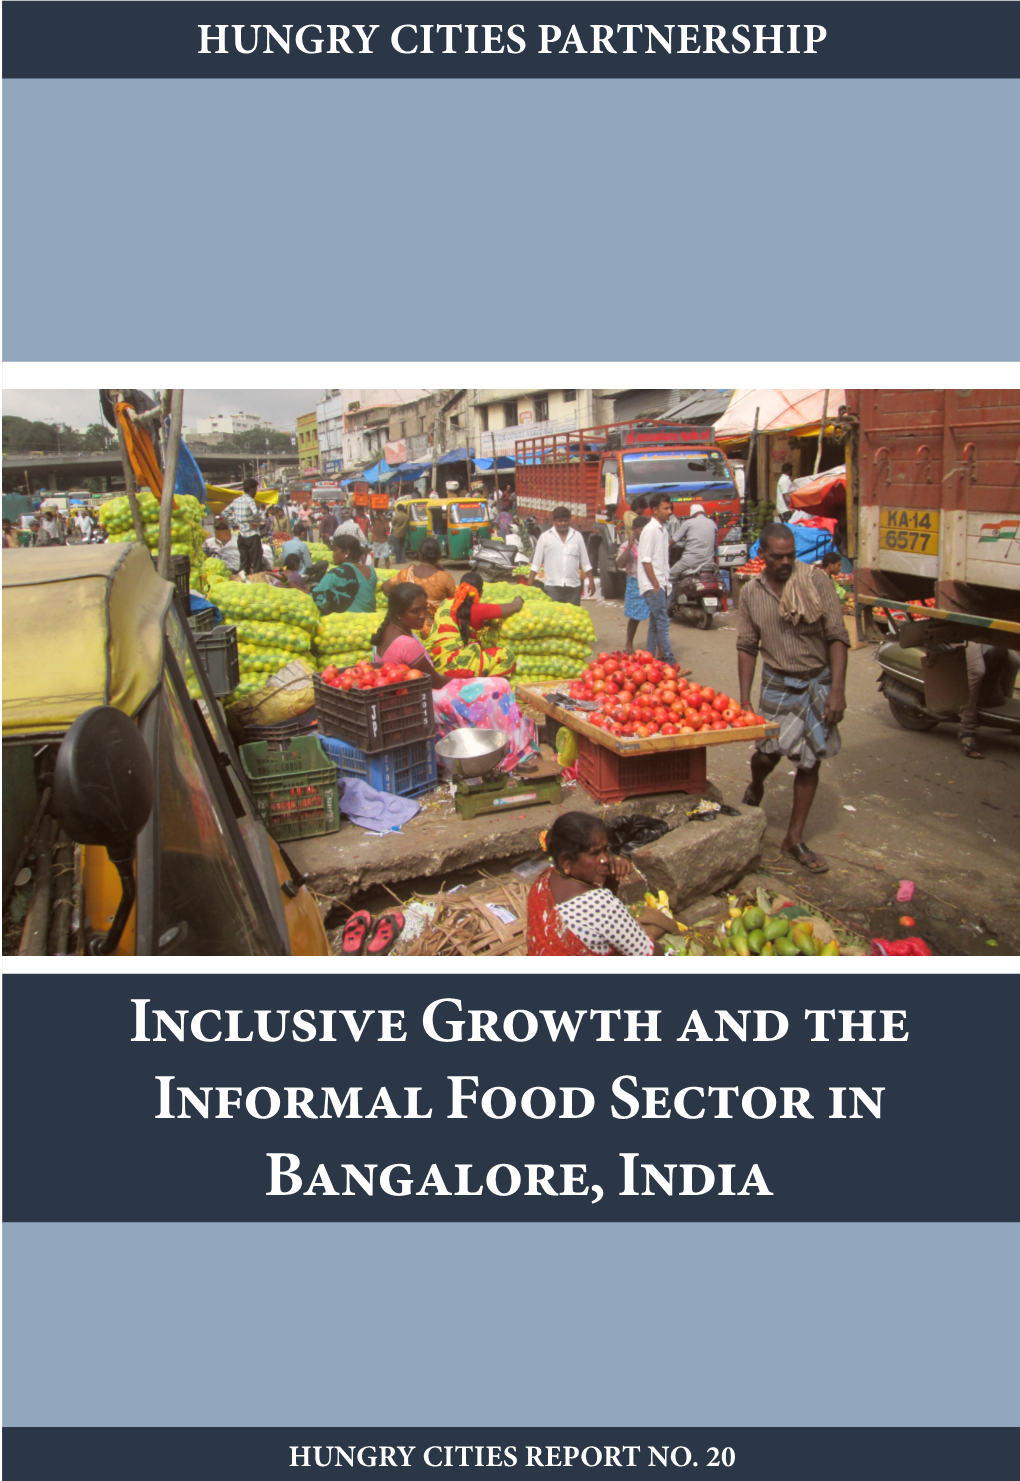 Inclusive Growth and the Informal Food Sector in Bangalore, India